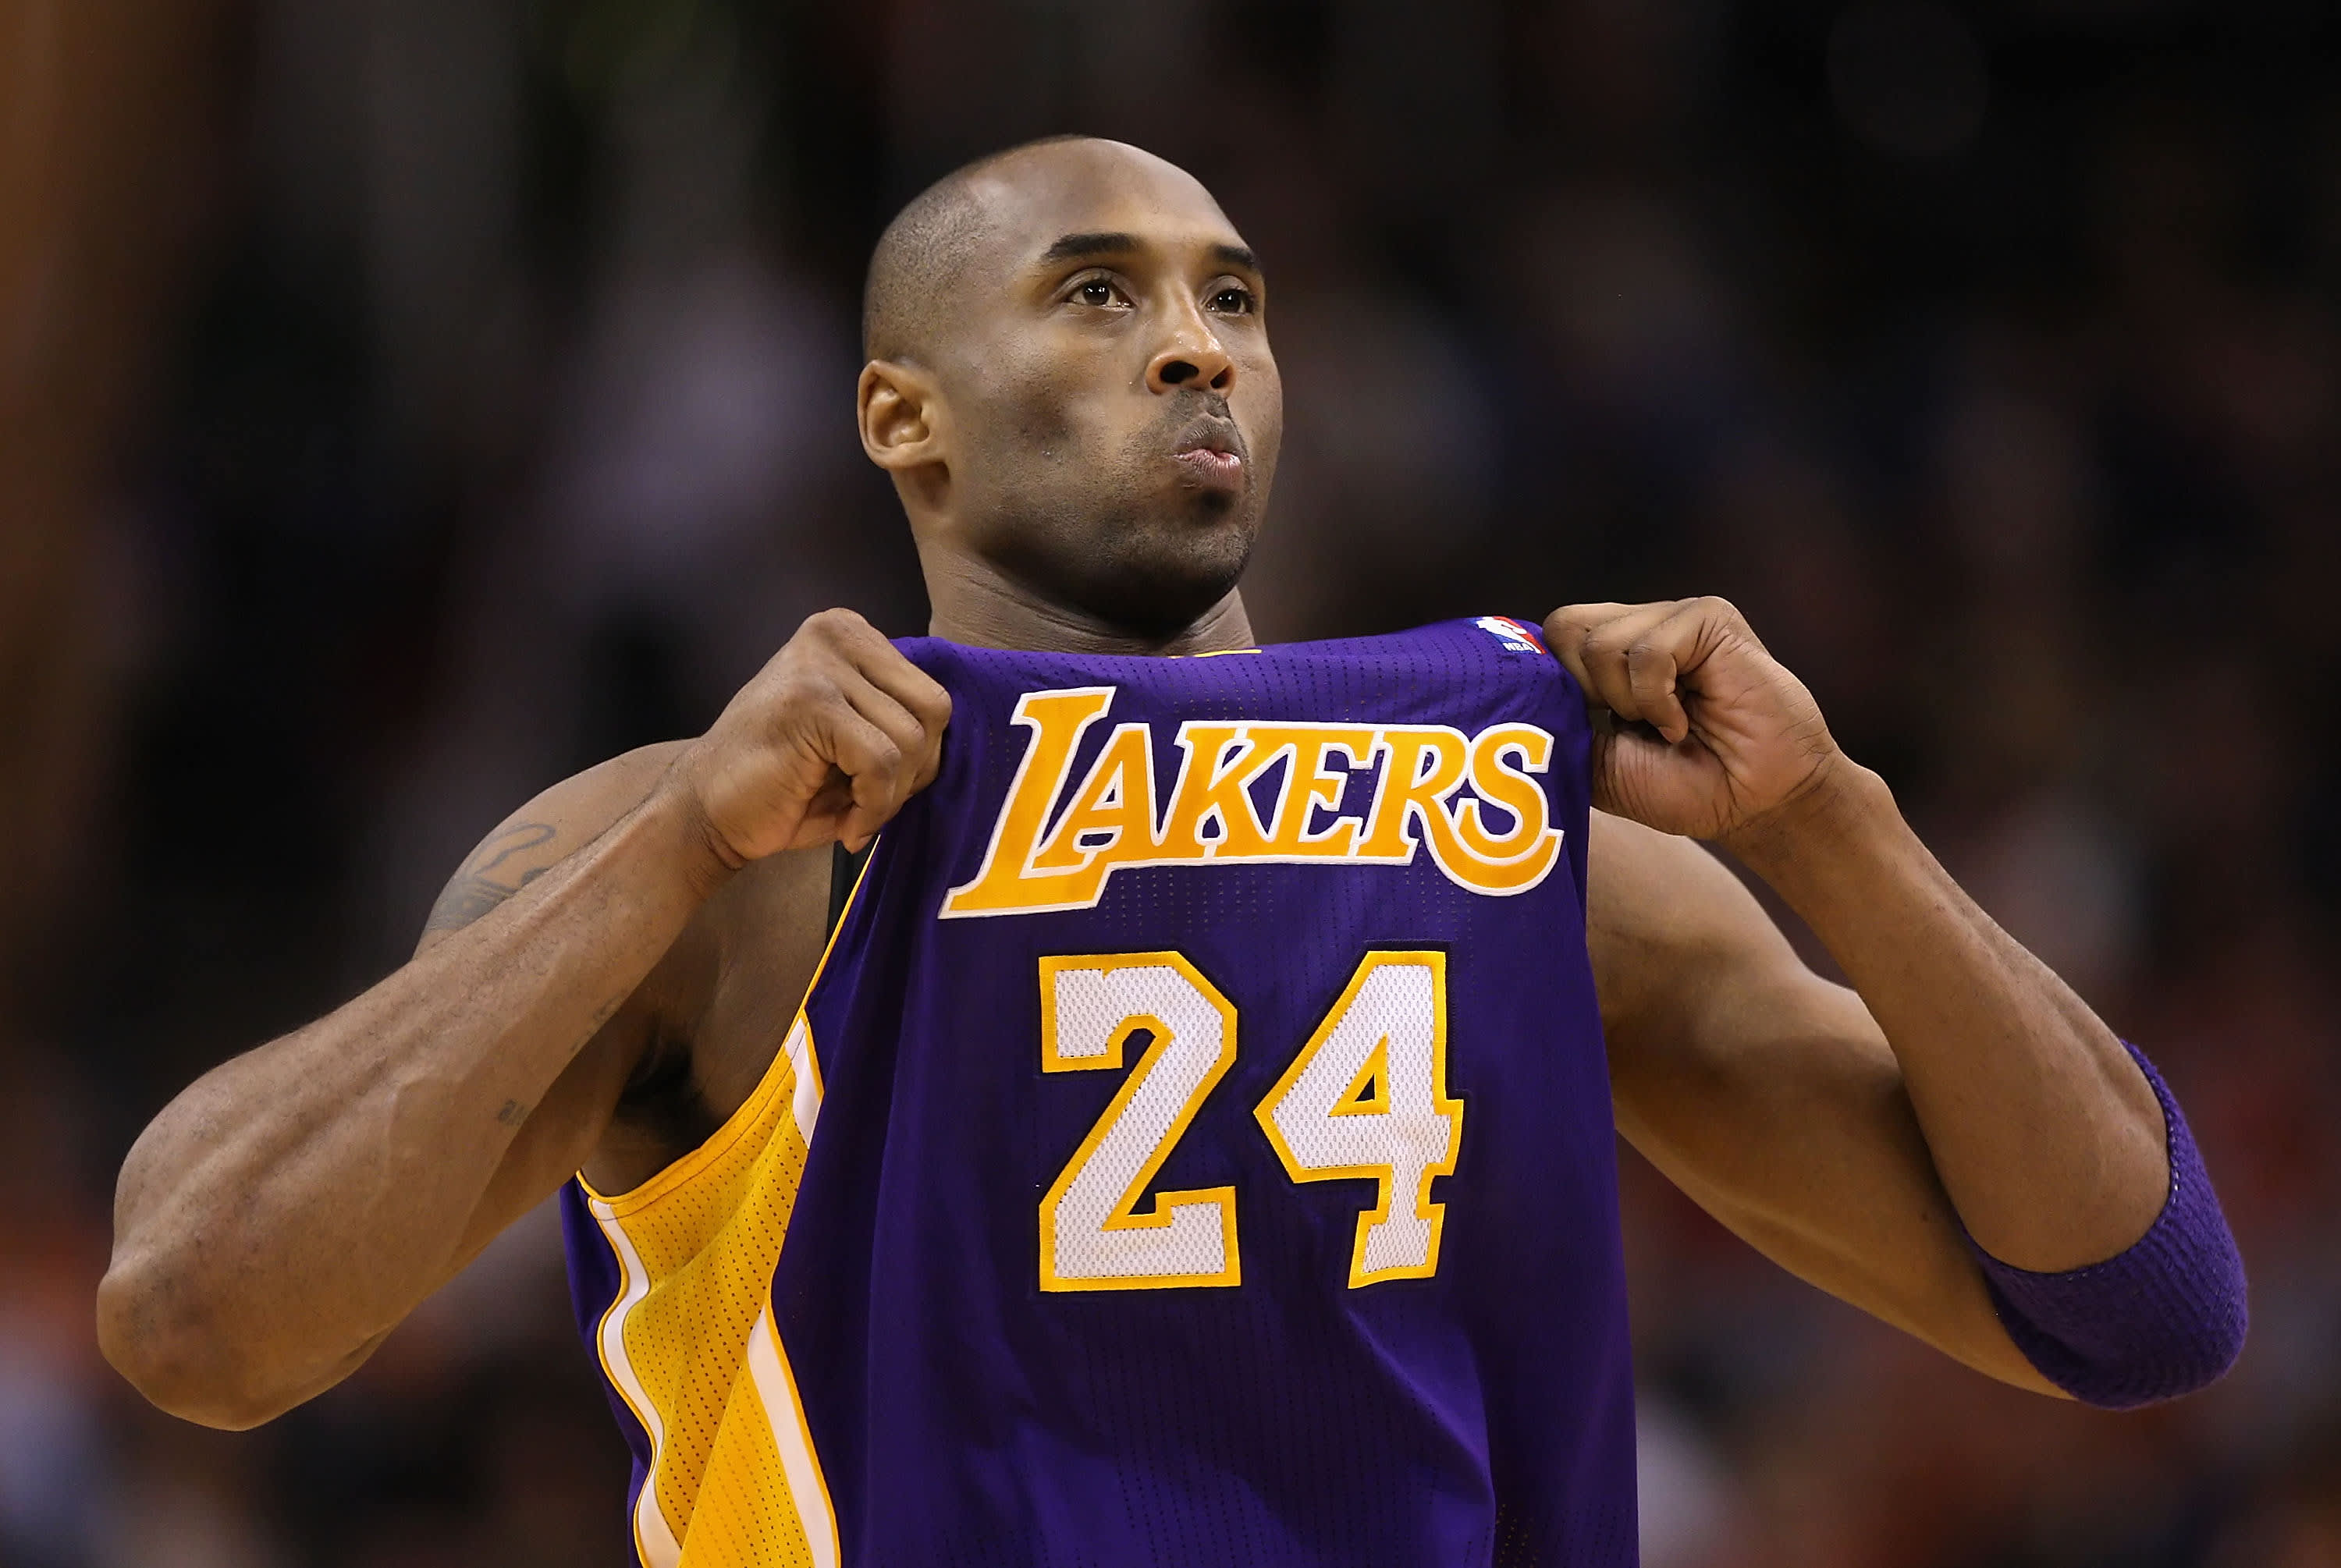 How did Kobe Bryant become successful? - Quora